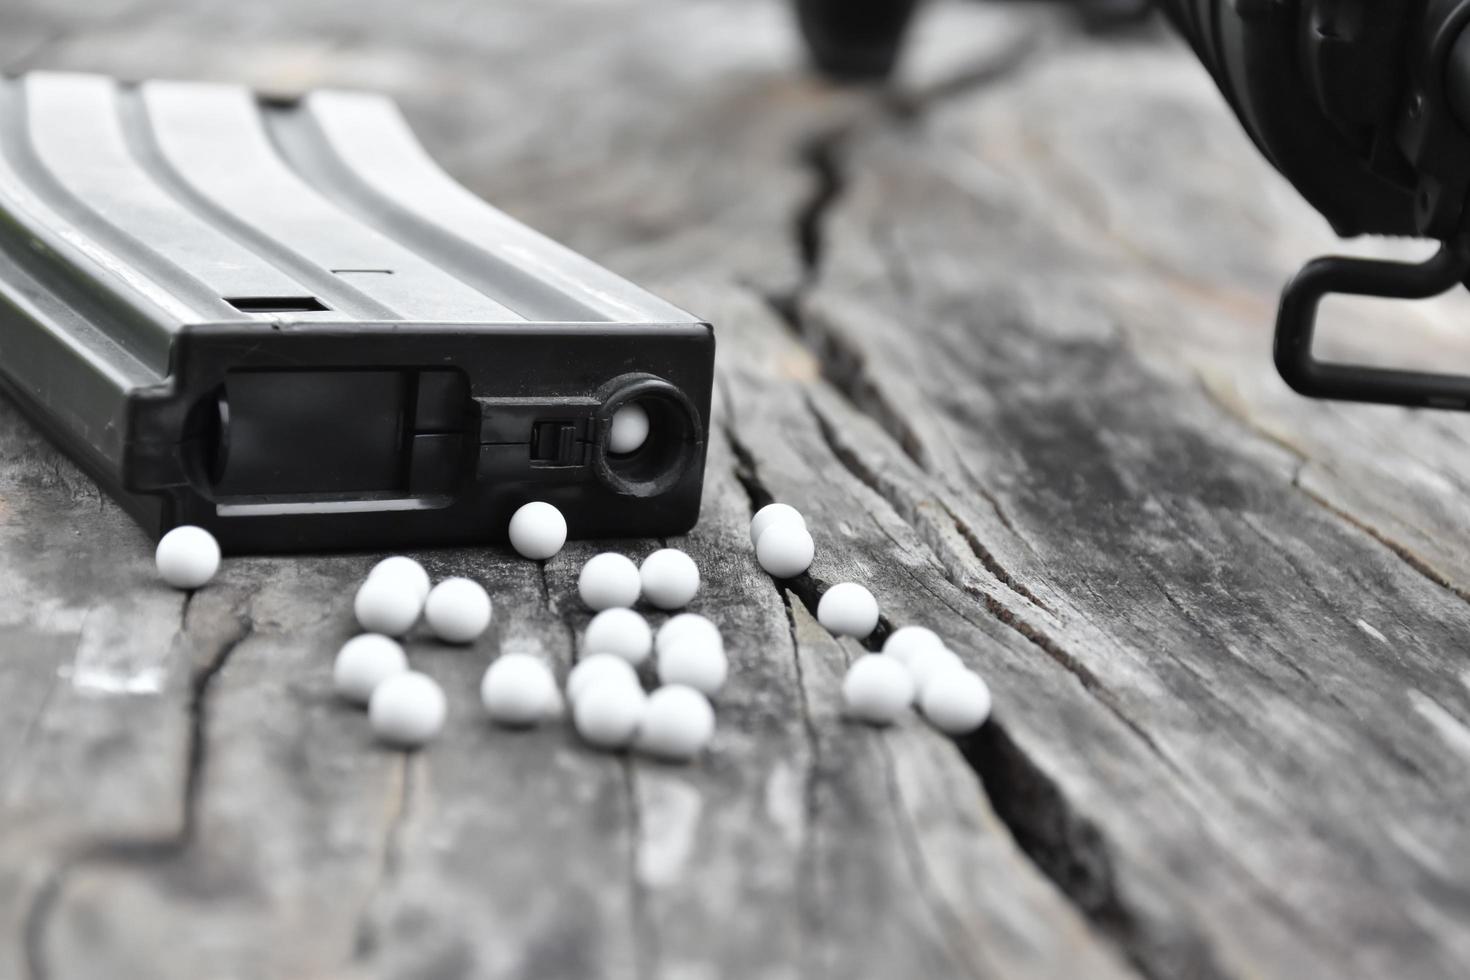 Closeup of white plastic bullets of airsoft gun or bb gun on wooden floor, soft and selective focus on white bullets. photo